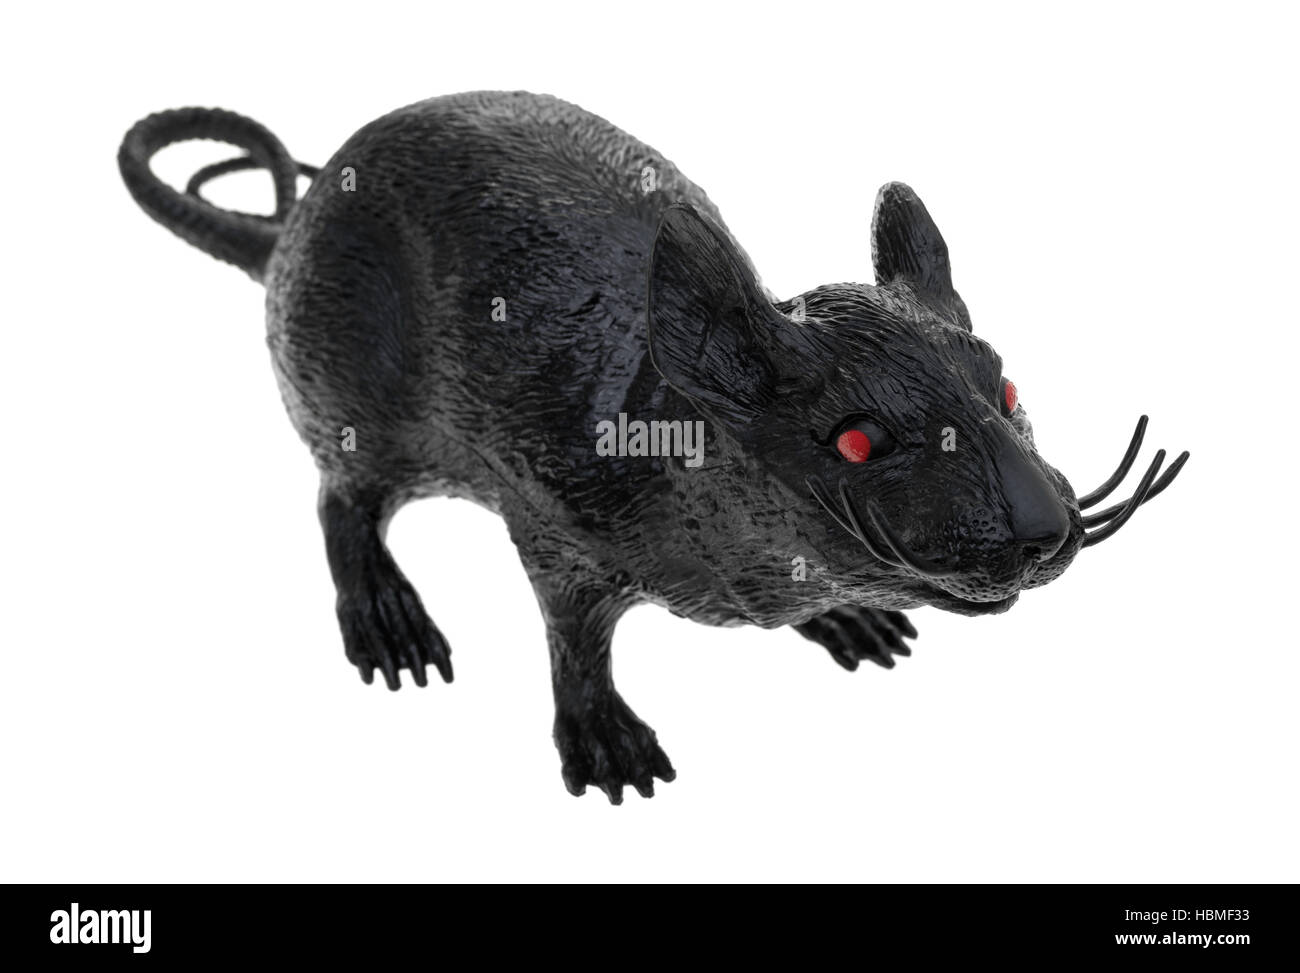 A black plastic toy rat isolated on a white background. Stock Photo